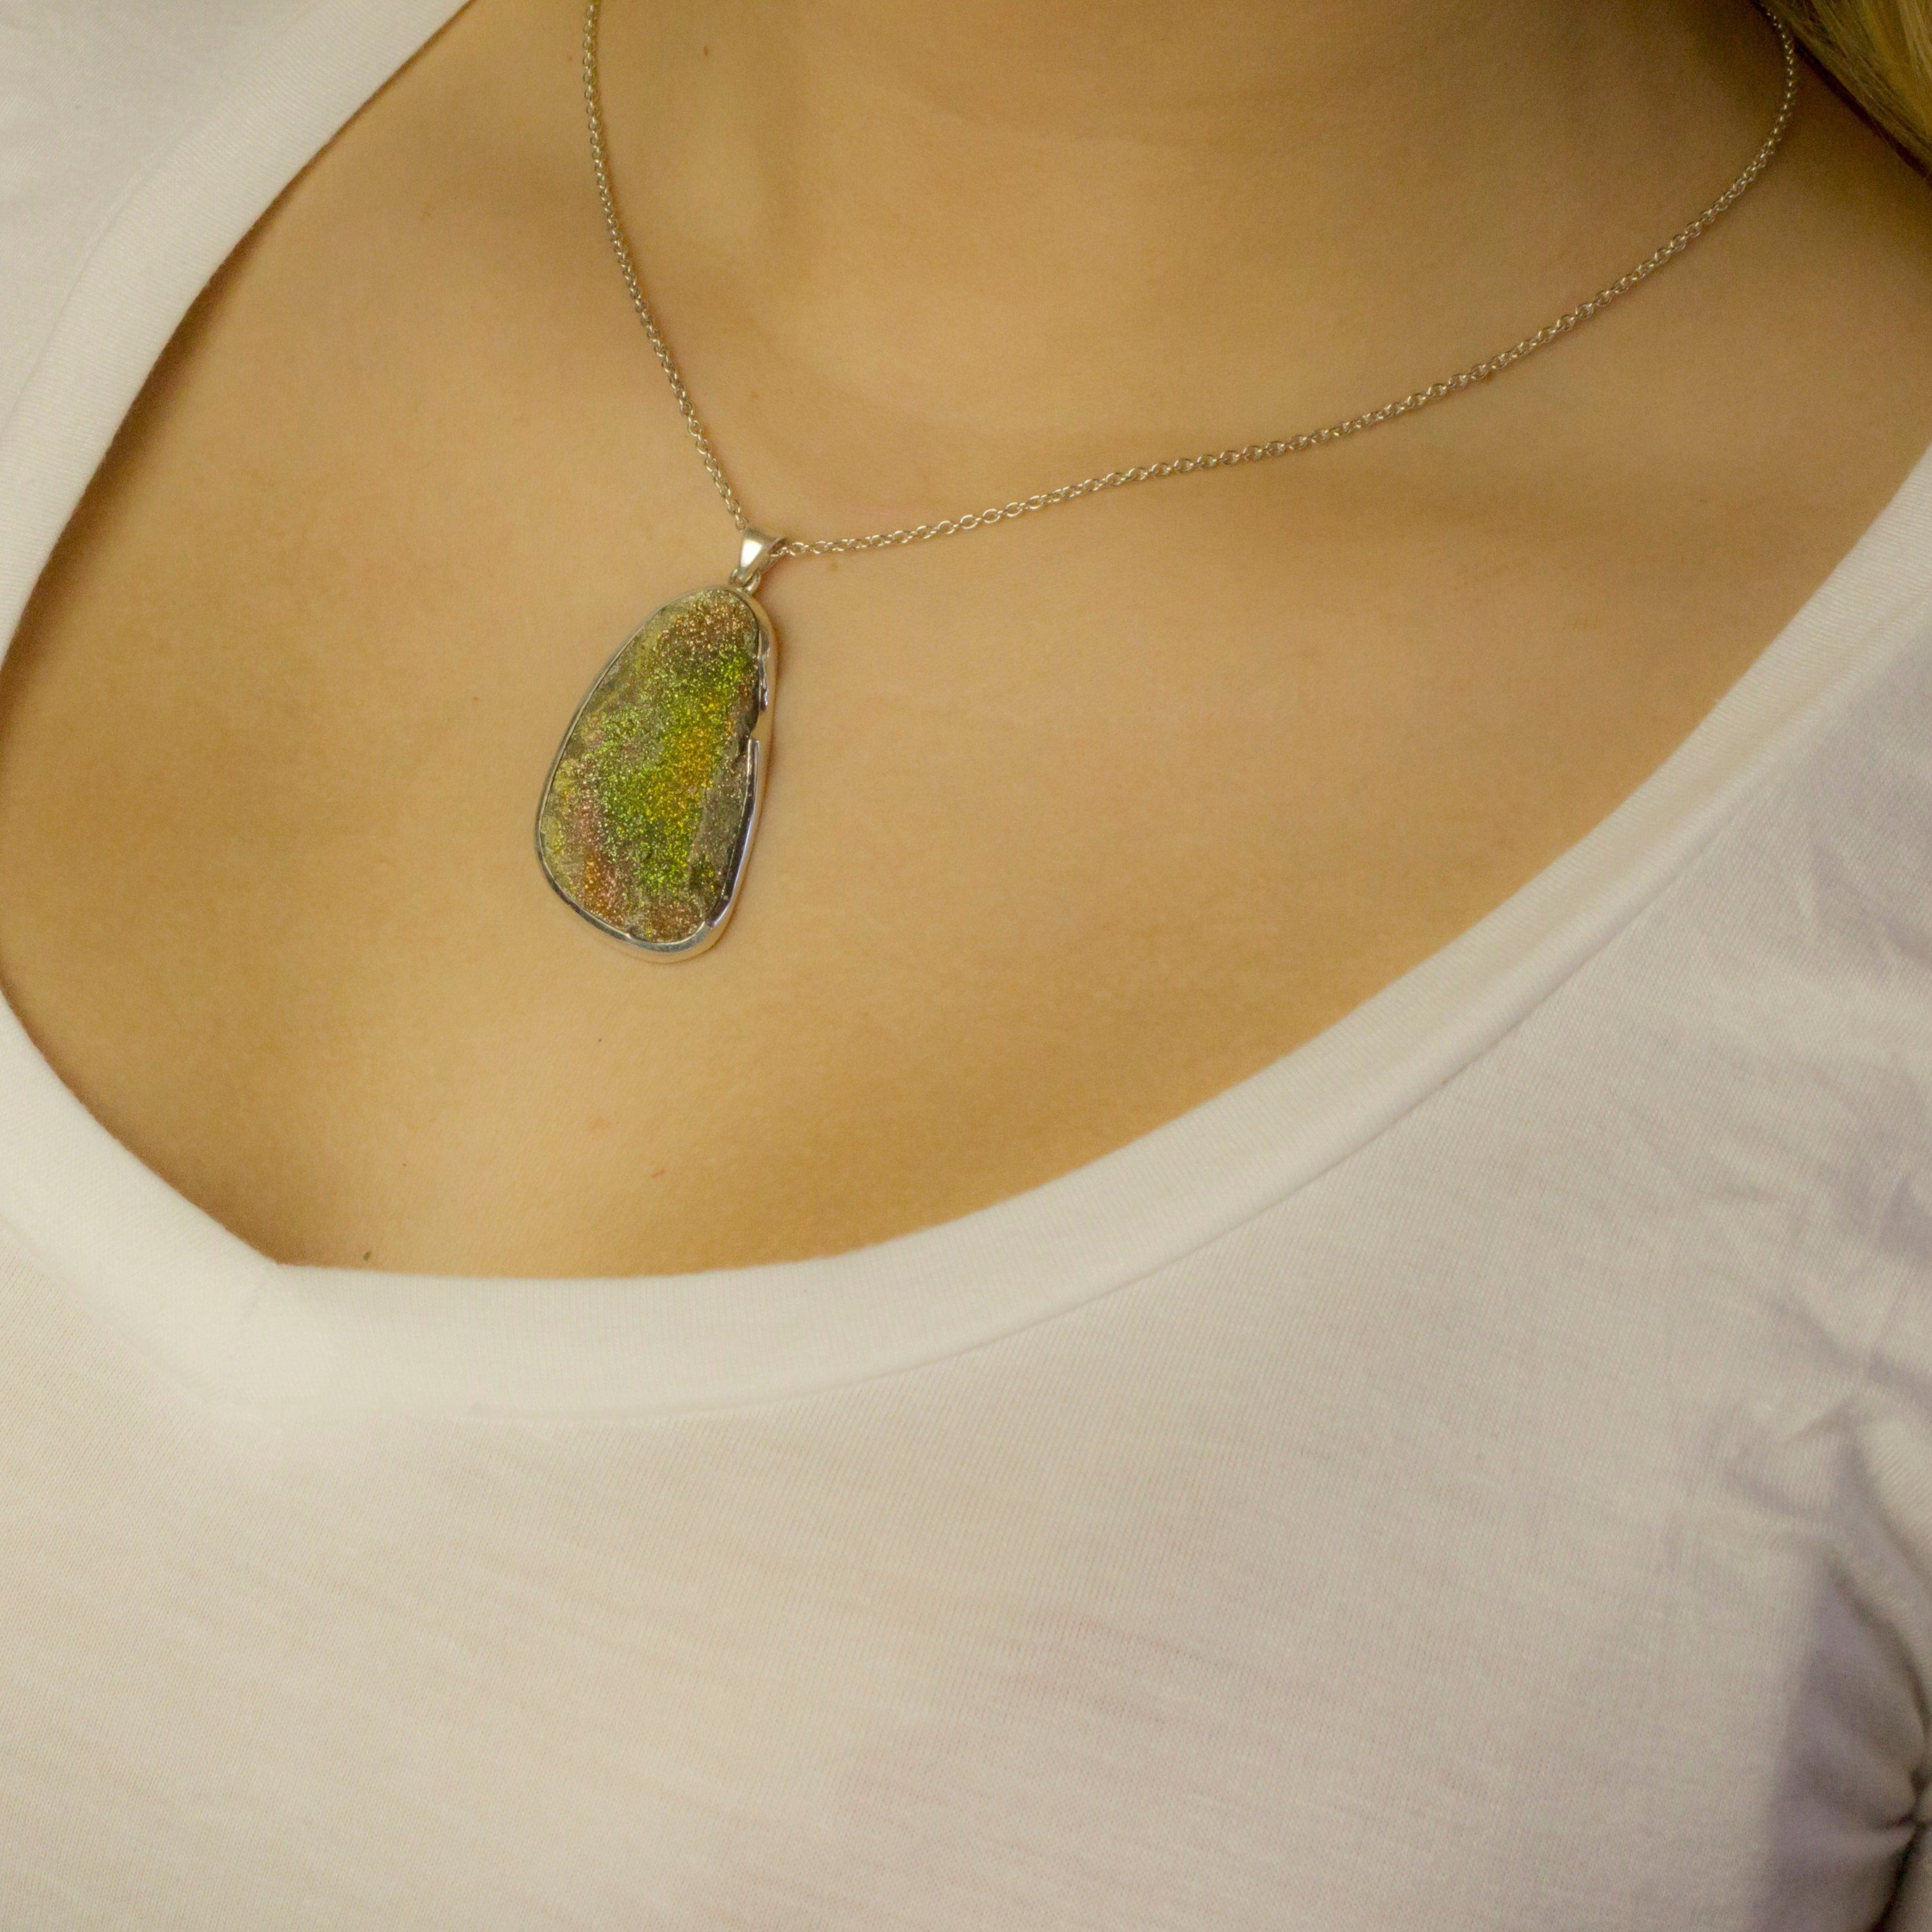 Rainbow Pyrite Necklace on Model